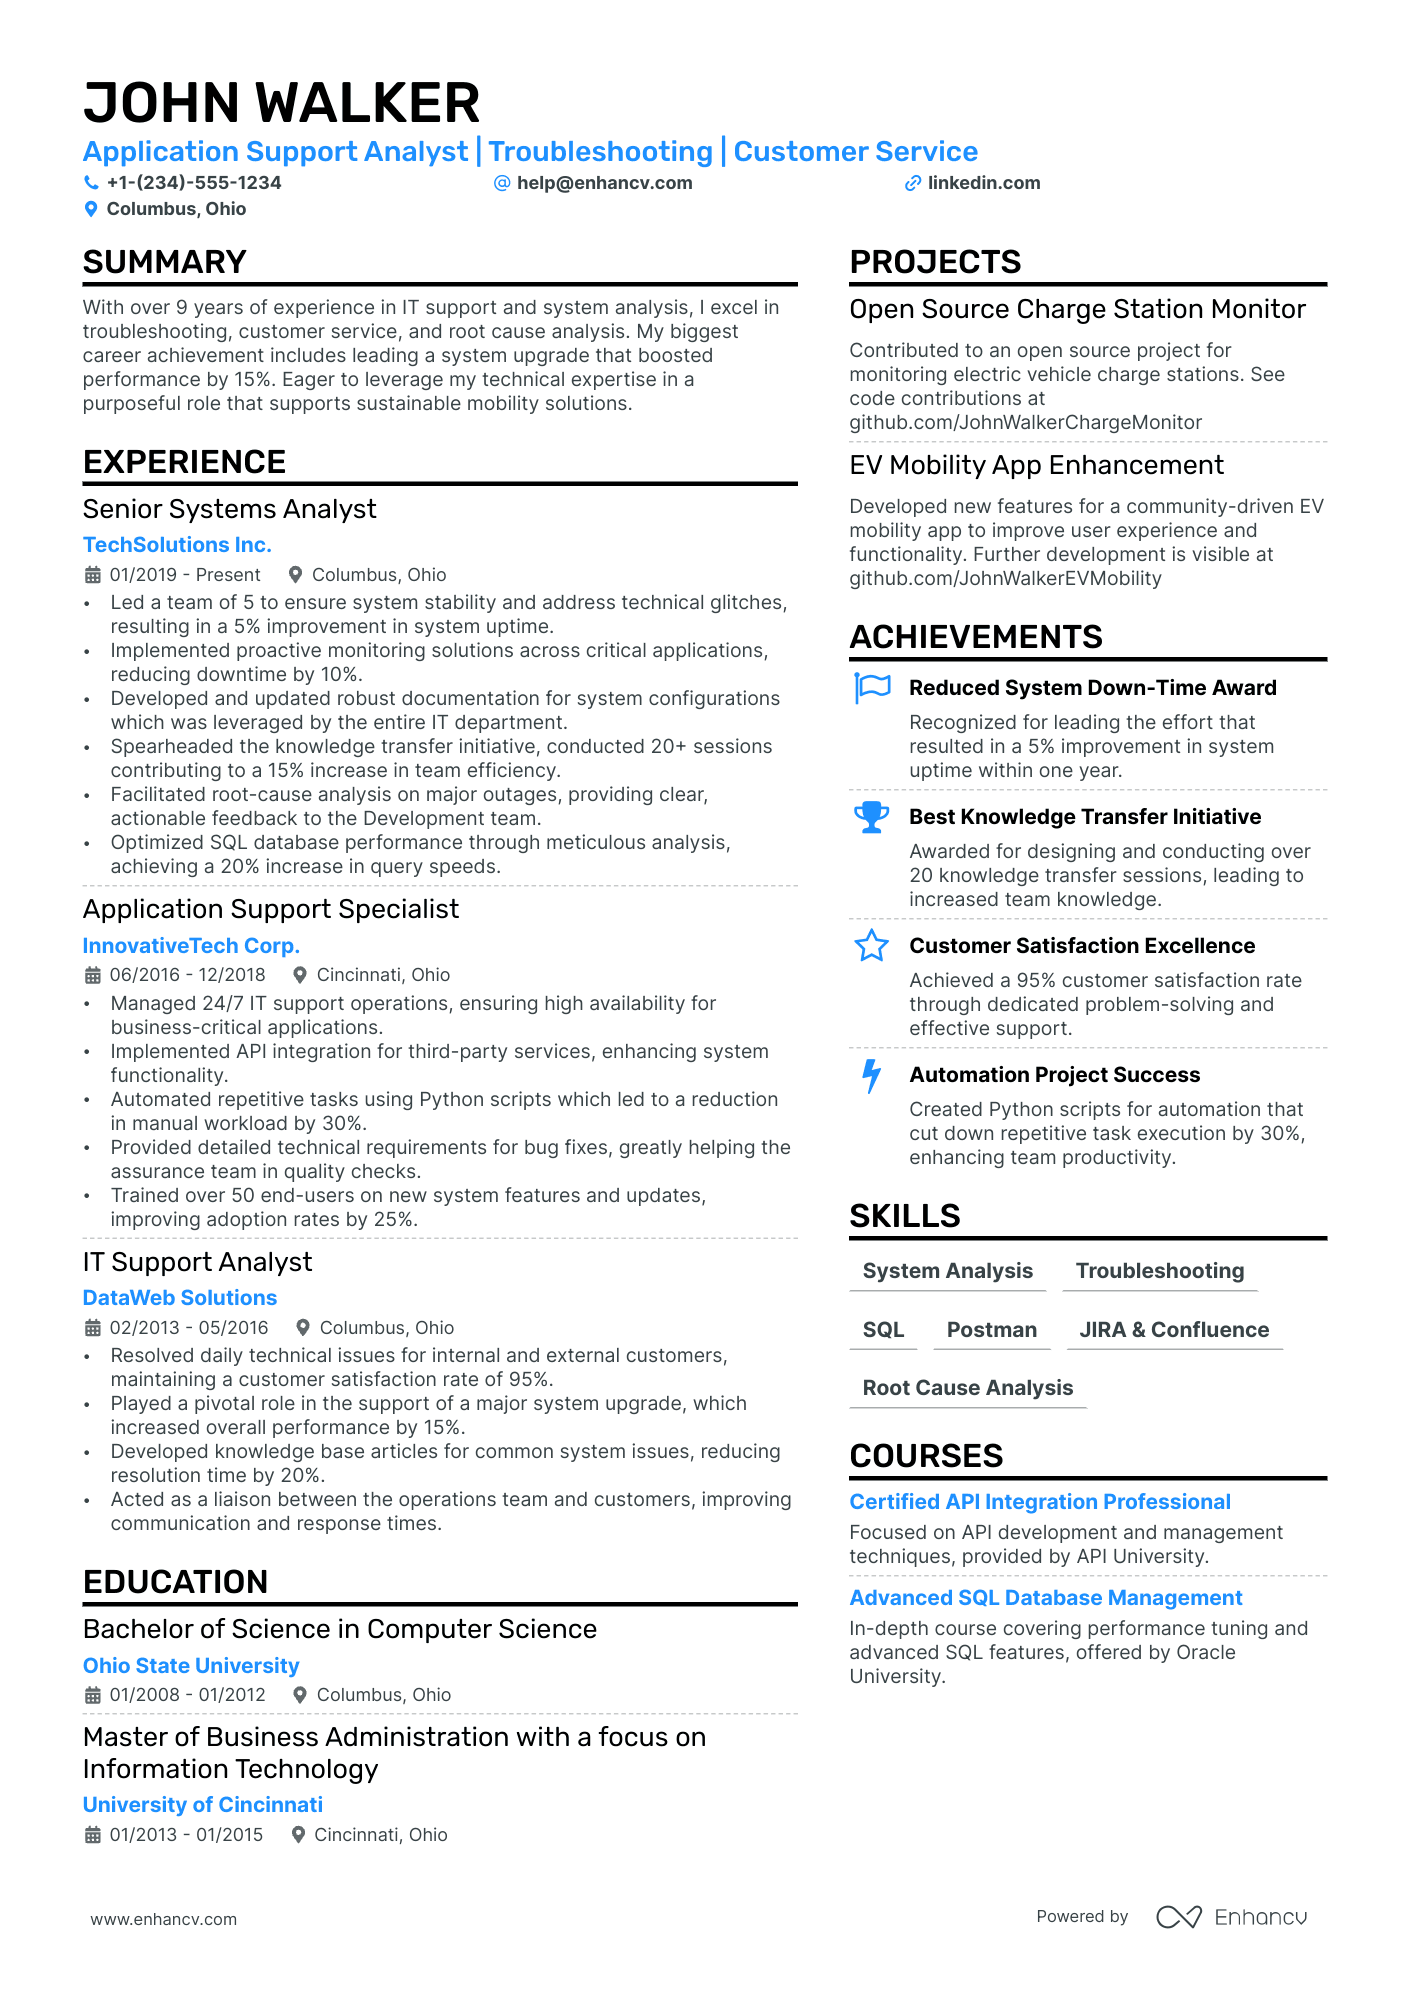 Application Support Manager resume example